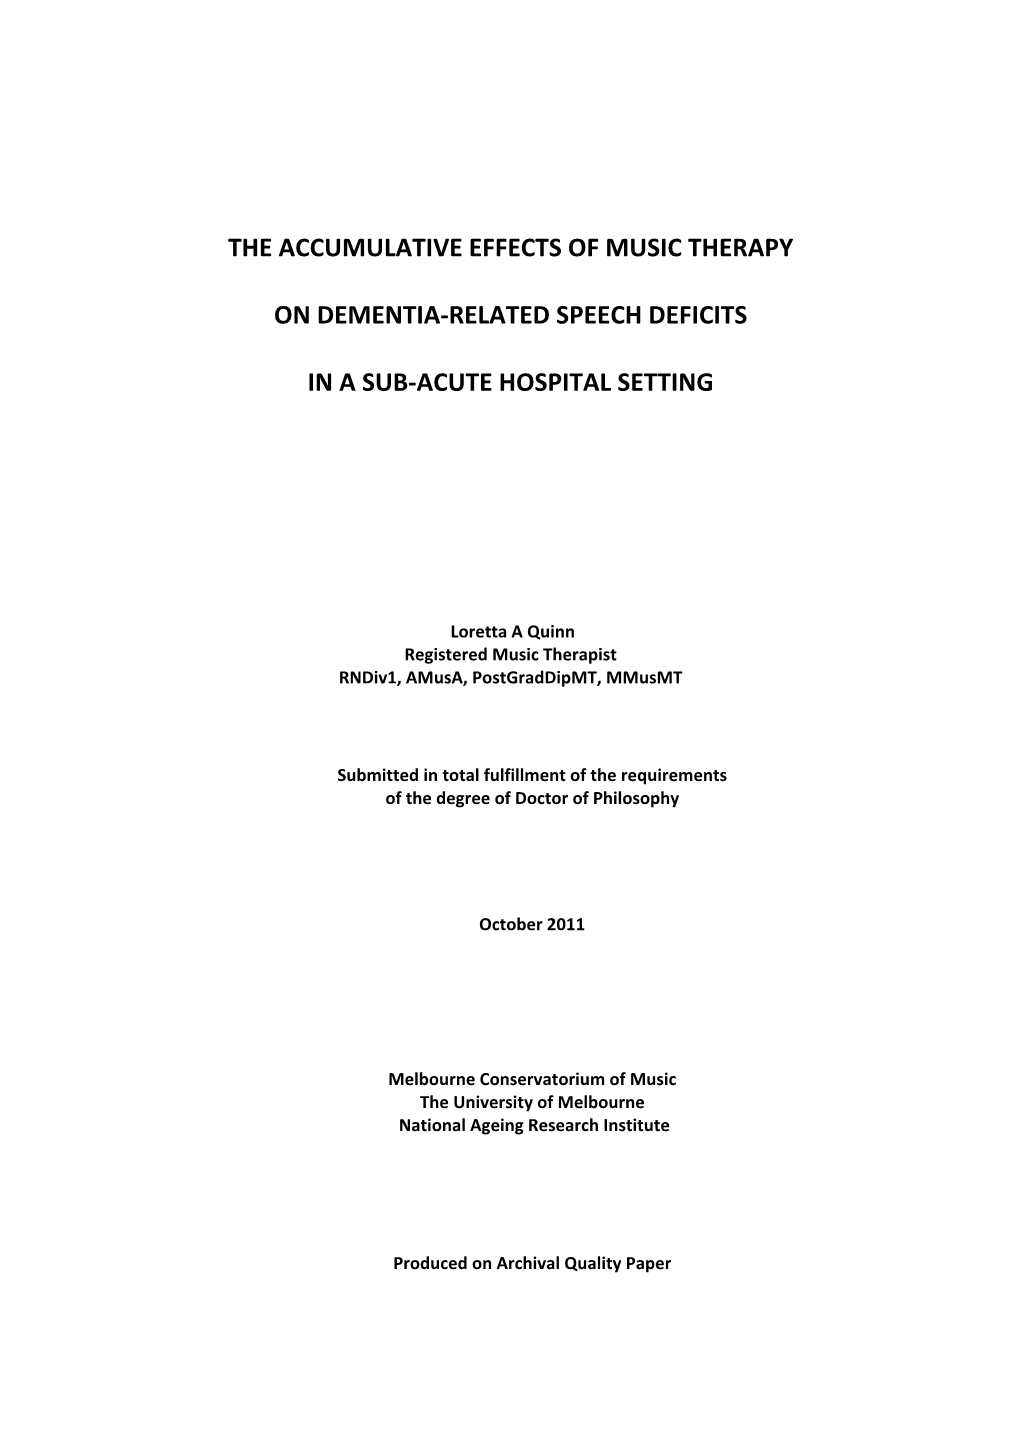 The Accumulative Effects of Music Therapy on Dementia‐Related Speech Deficits